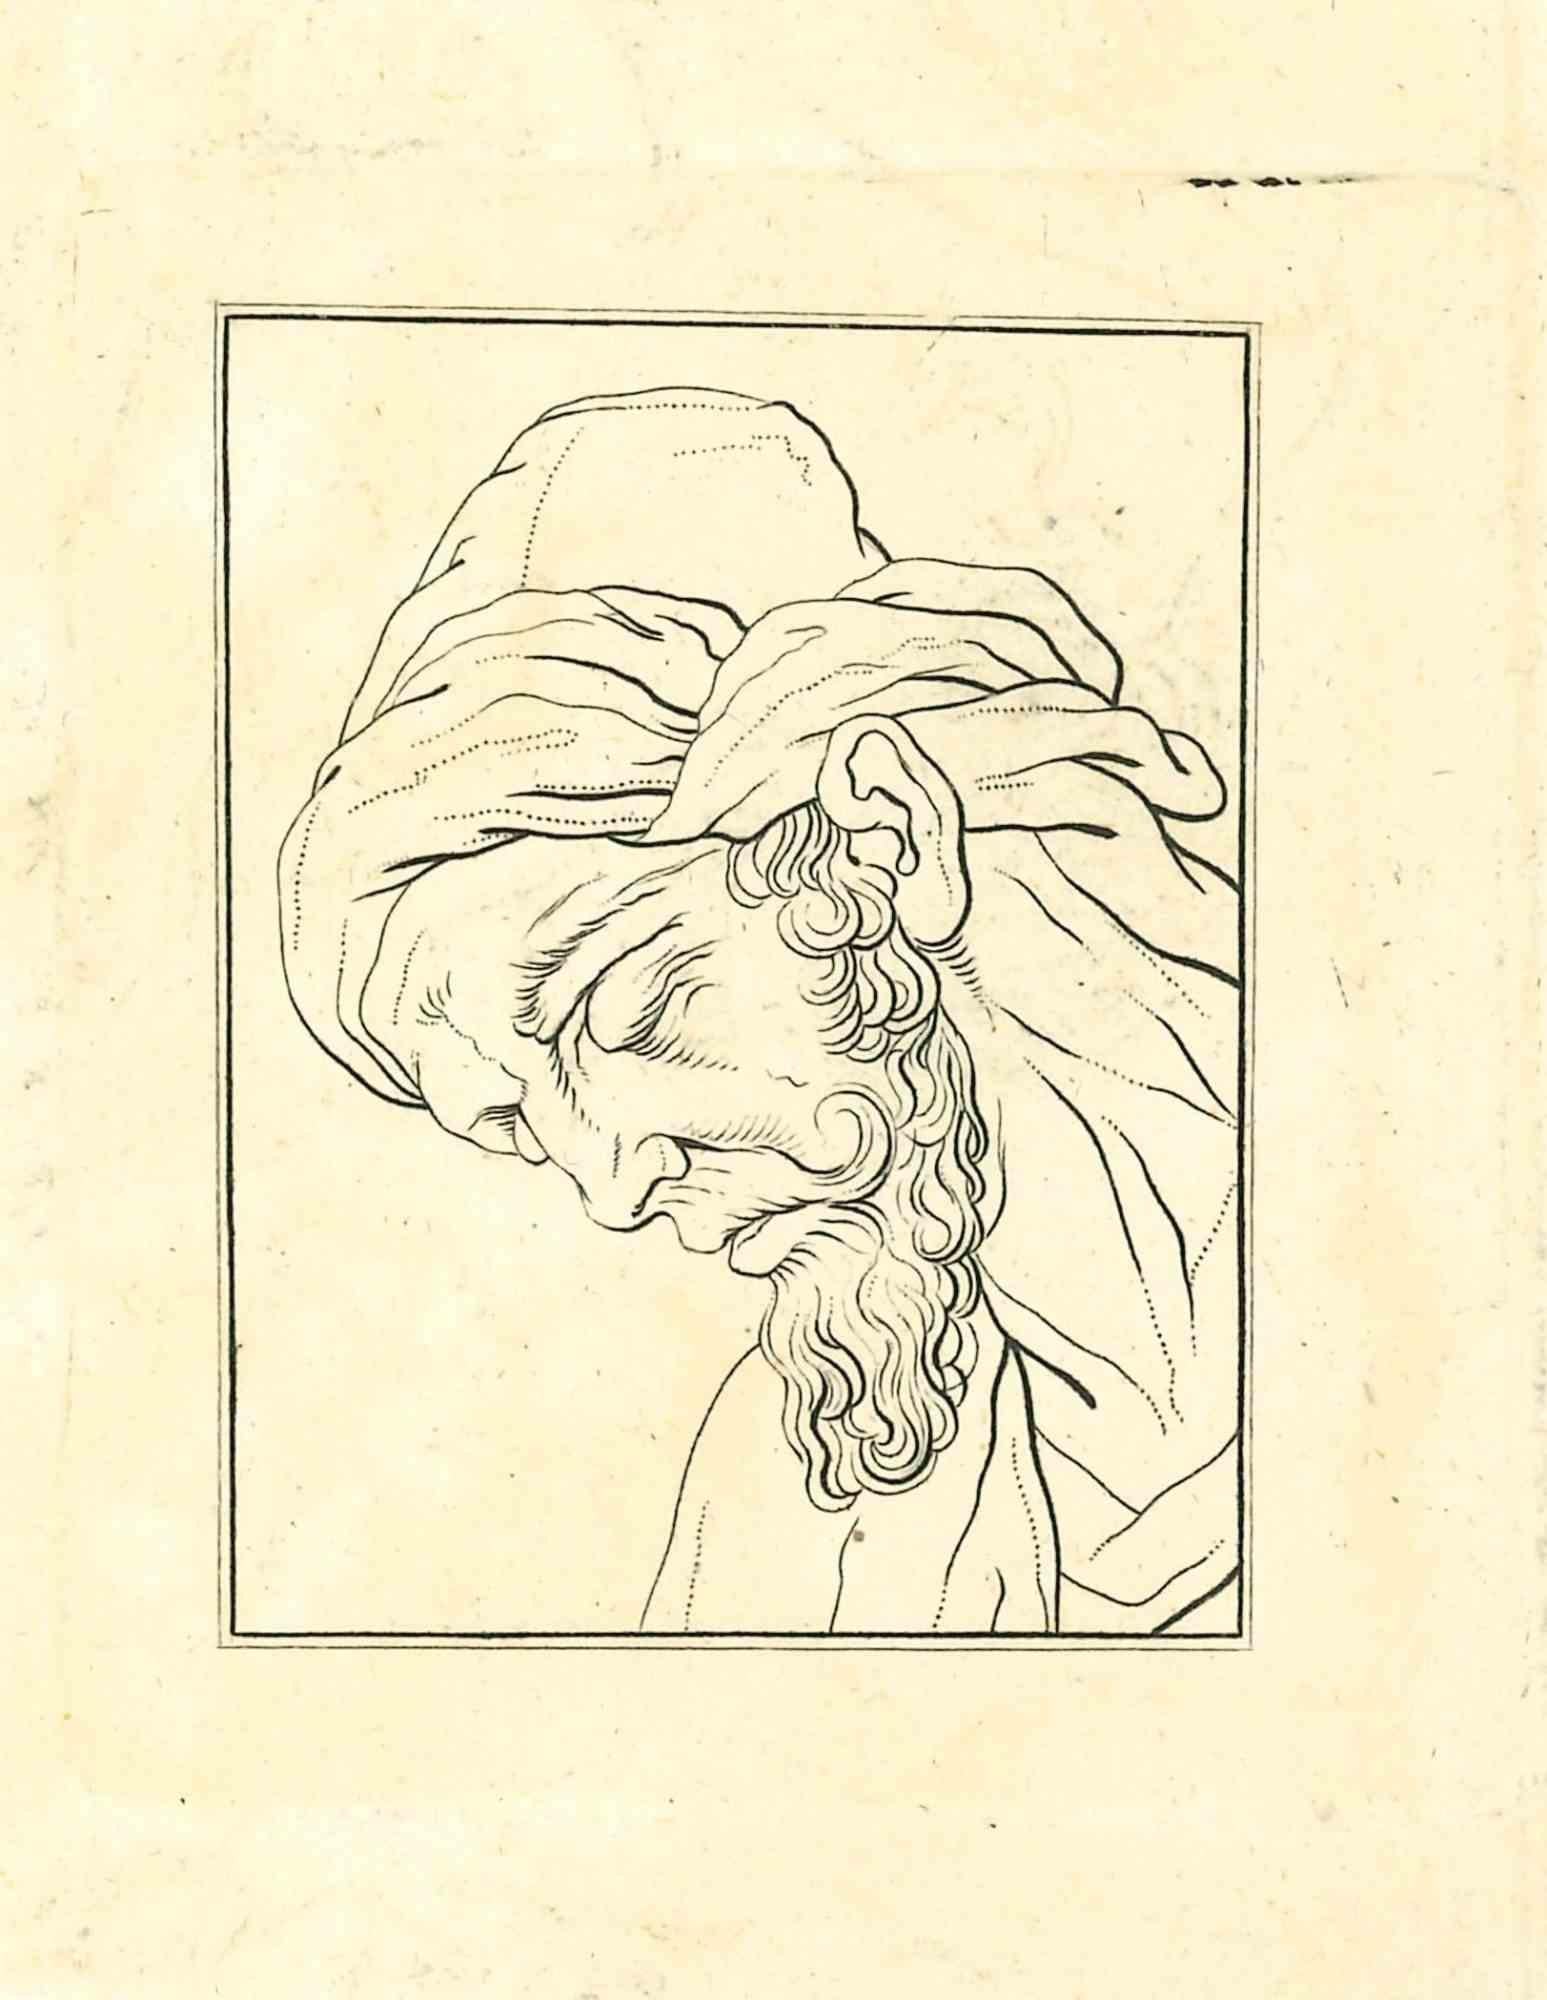 Portrait of a man is an original etching artwork realized by Thomas Holloway for Johann Caspar Lavater's "Essays on Physiognomy, Designed to Promote the Knowledge and the Love of Mankind", London, Bensley, 1810. 

Good conditions with minor